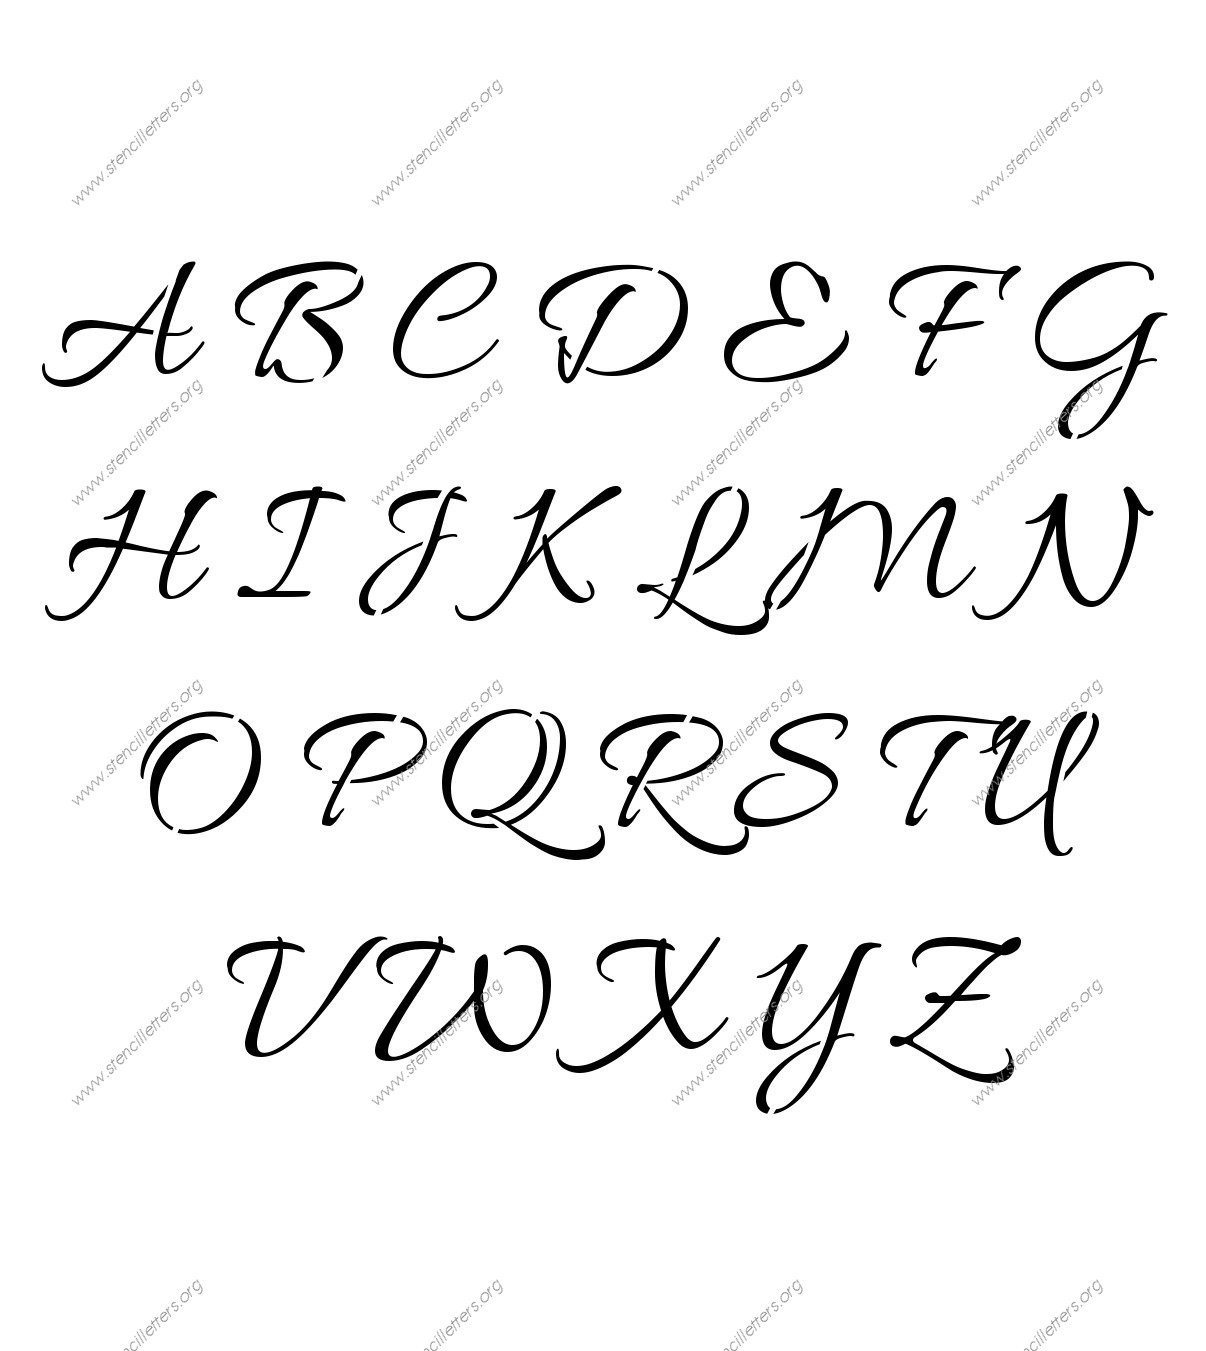 Connected Cursive A to Z uppercase letter stencils